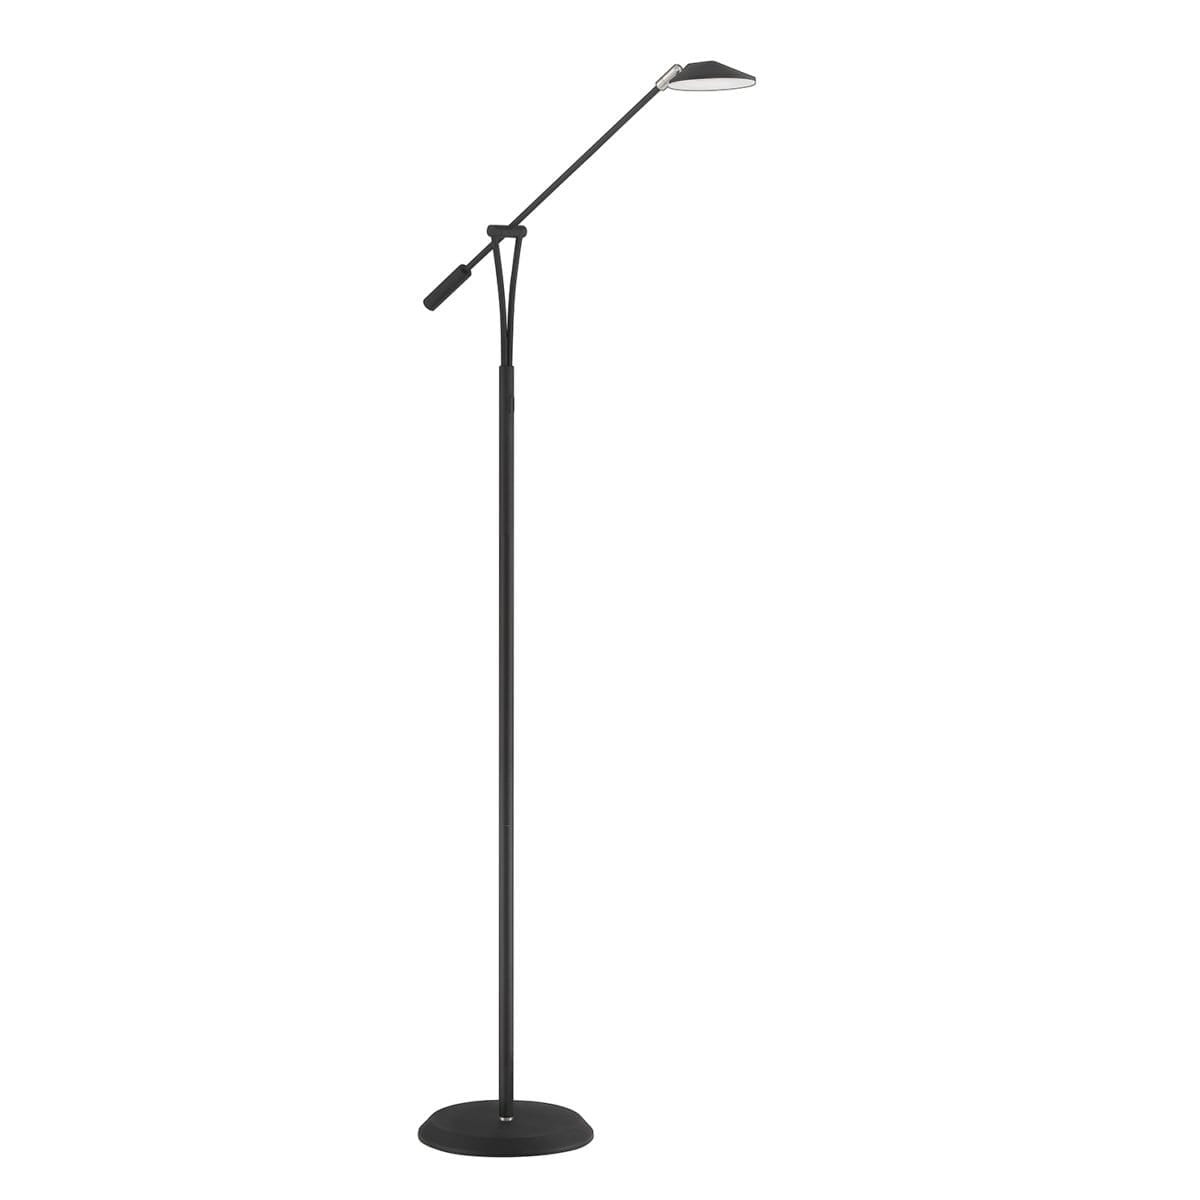 148 FL5015 BLK/SN
LED Floor Lamp available in 
Black with Satin Nickle
 or Satin Nickle
Regular Price $238.99
Sale Price $167.99